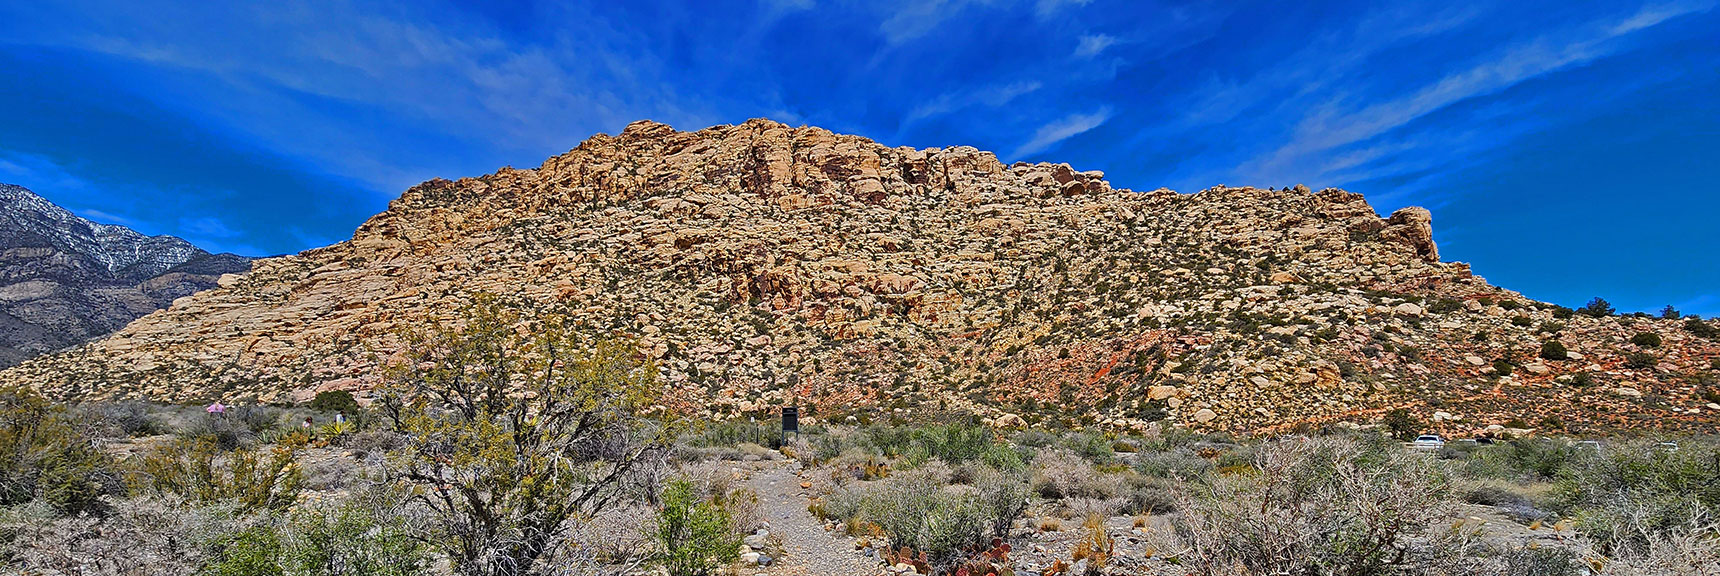 Cross Dry Wash to SMYC Northern Trailhead | SMYC Trail | Red Rock Canyon National Conservation Area, Nevada | David Smith | LasVegasAreaTrails.com